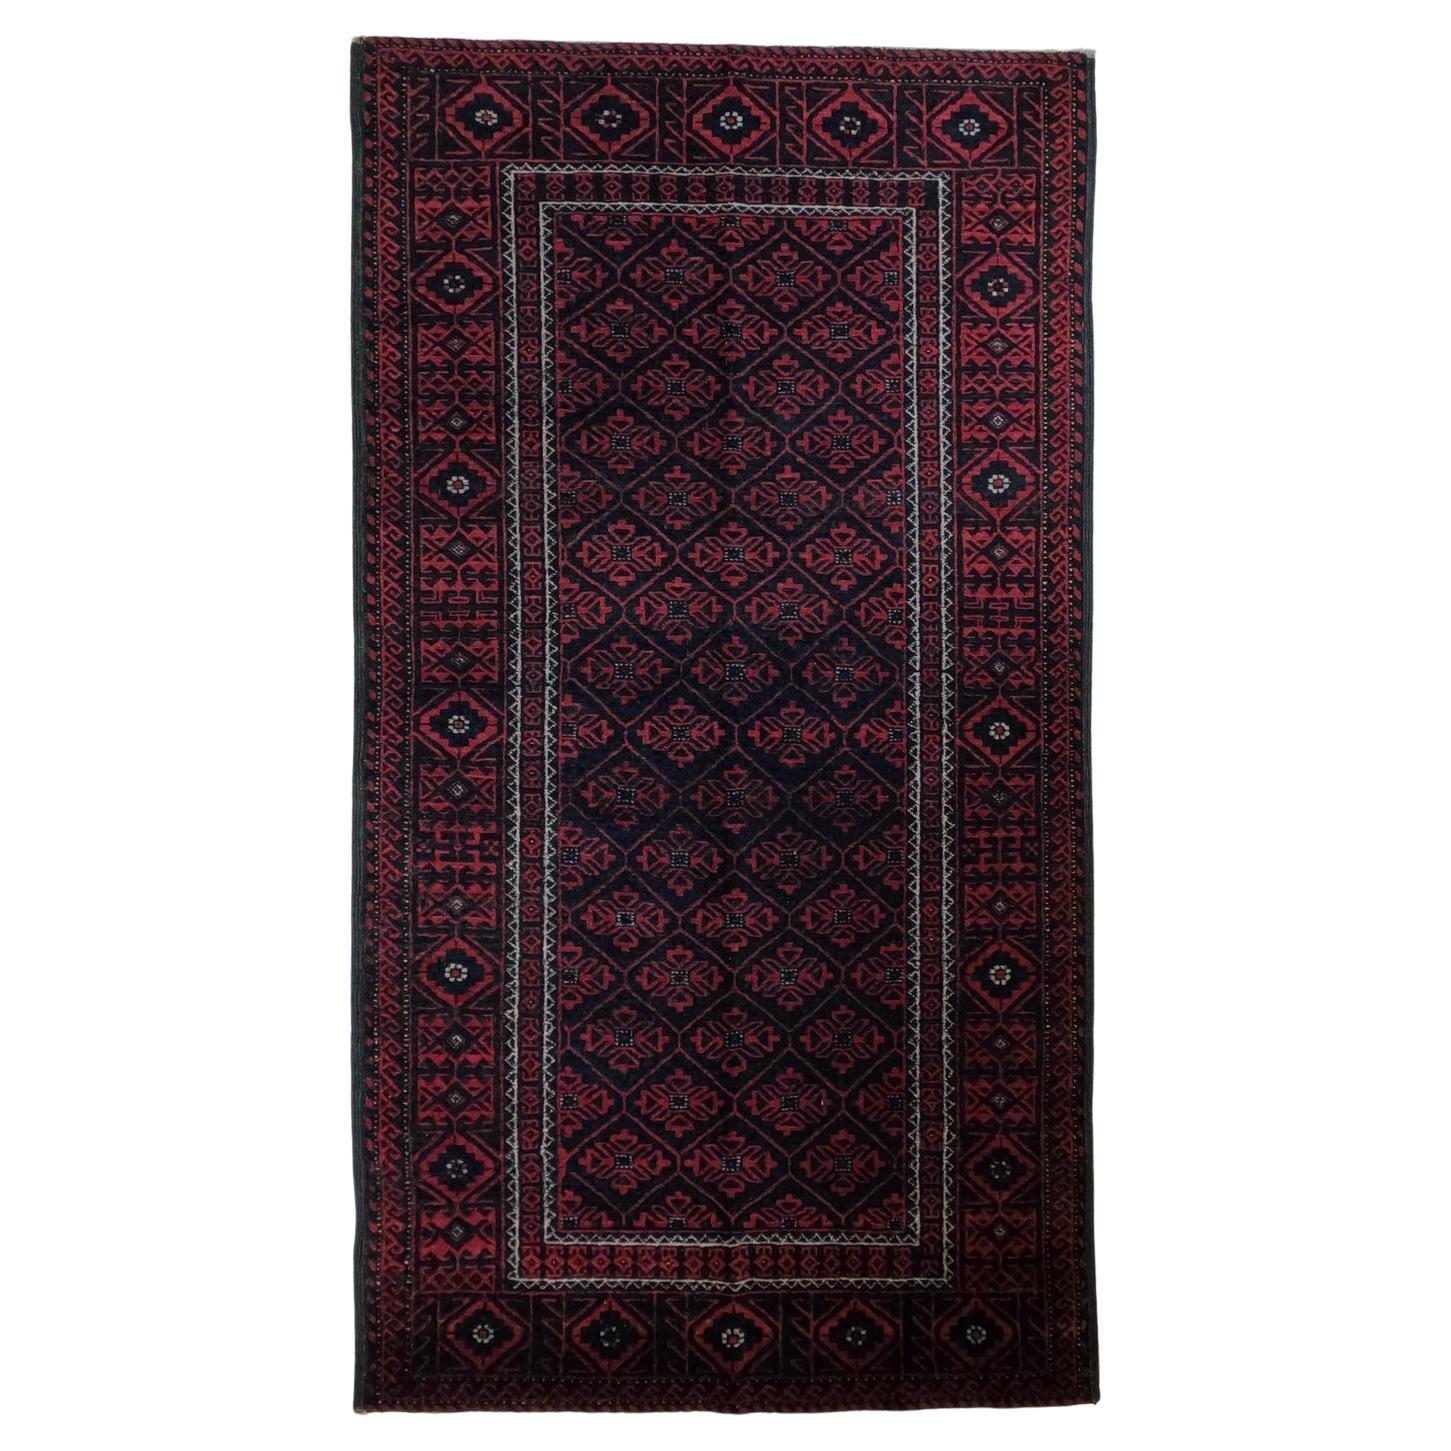 Balouchi red and black  Vintage Semi Antique carpet  mid 20th-century  For Sale